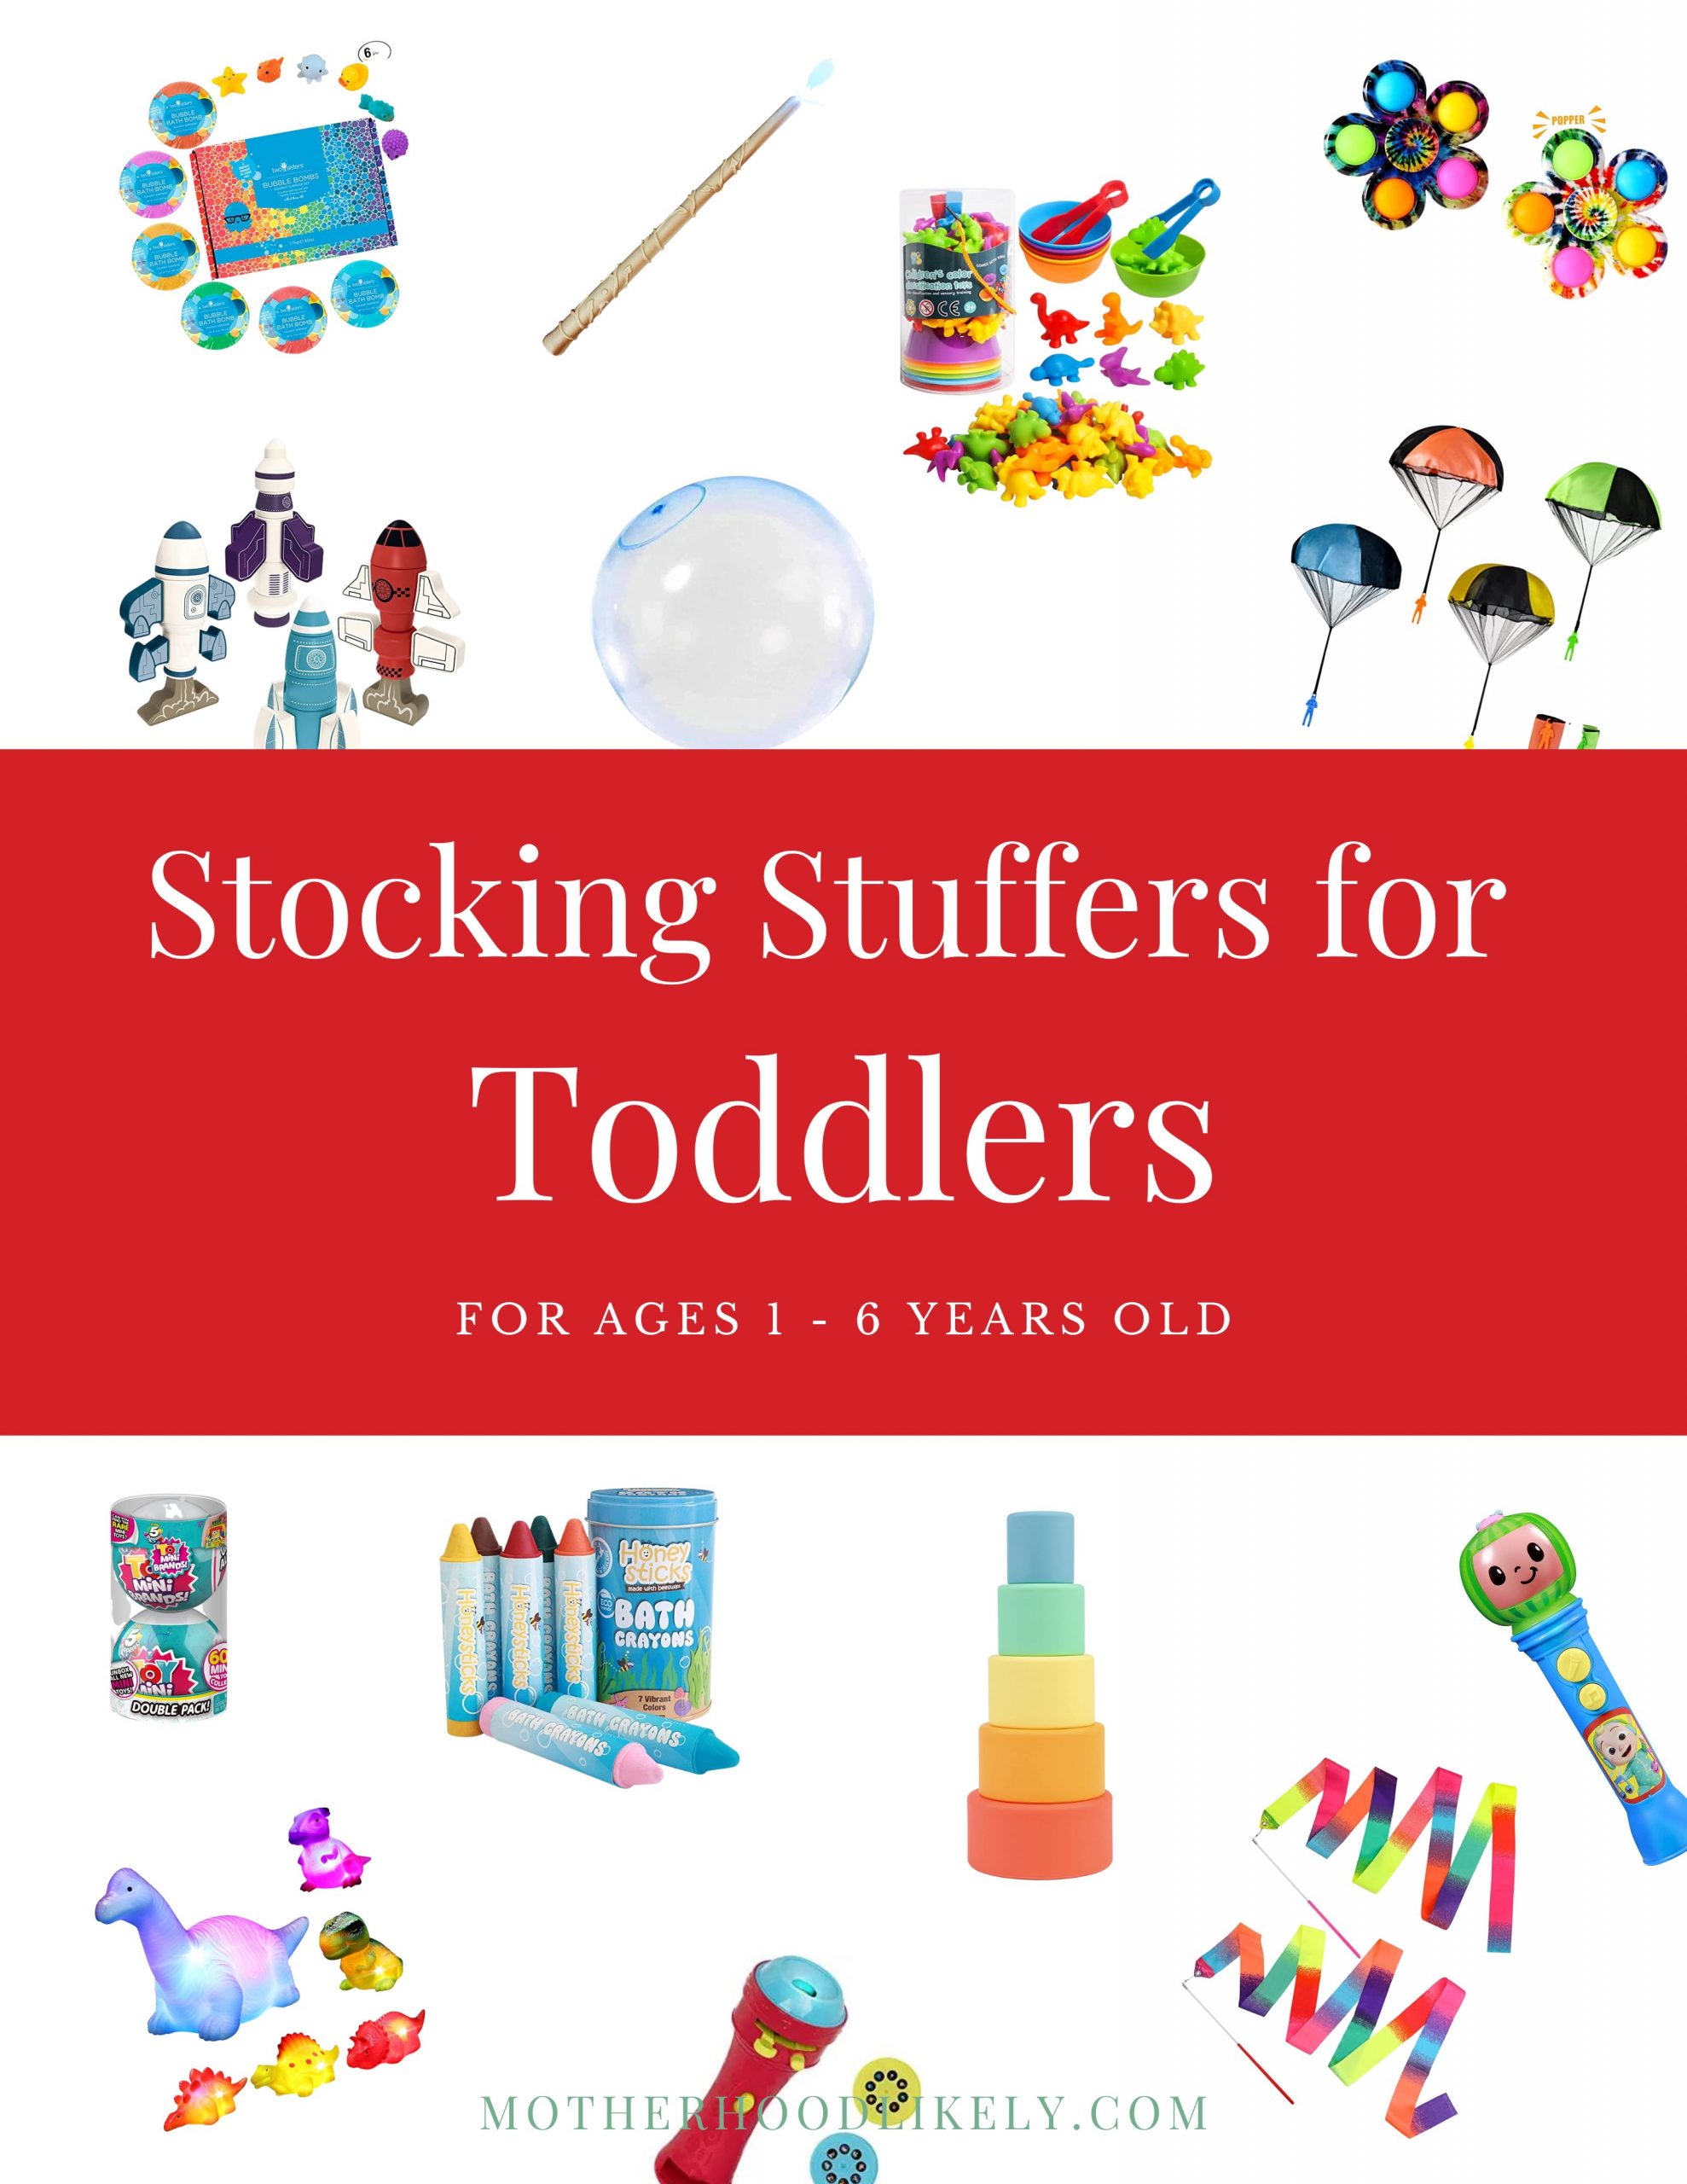 Christmas stocking stuffers for toddlers and children